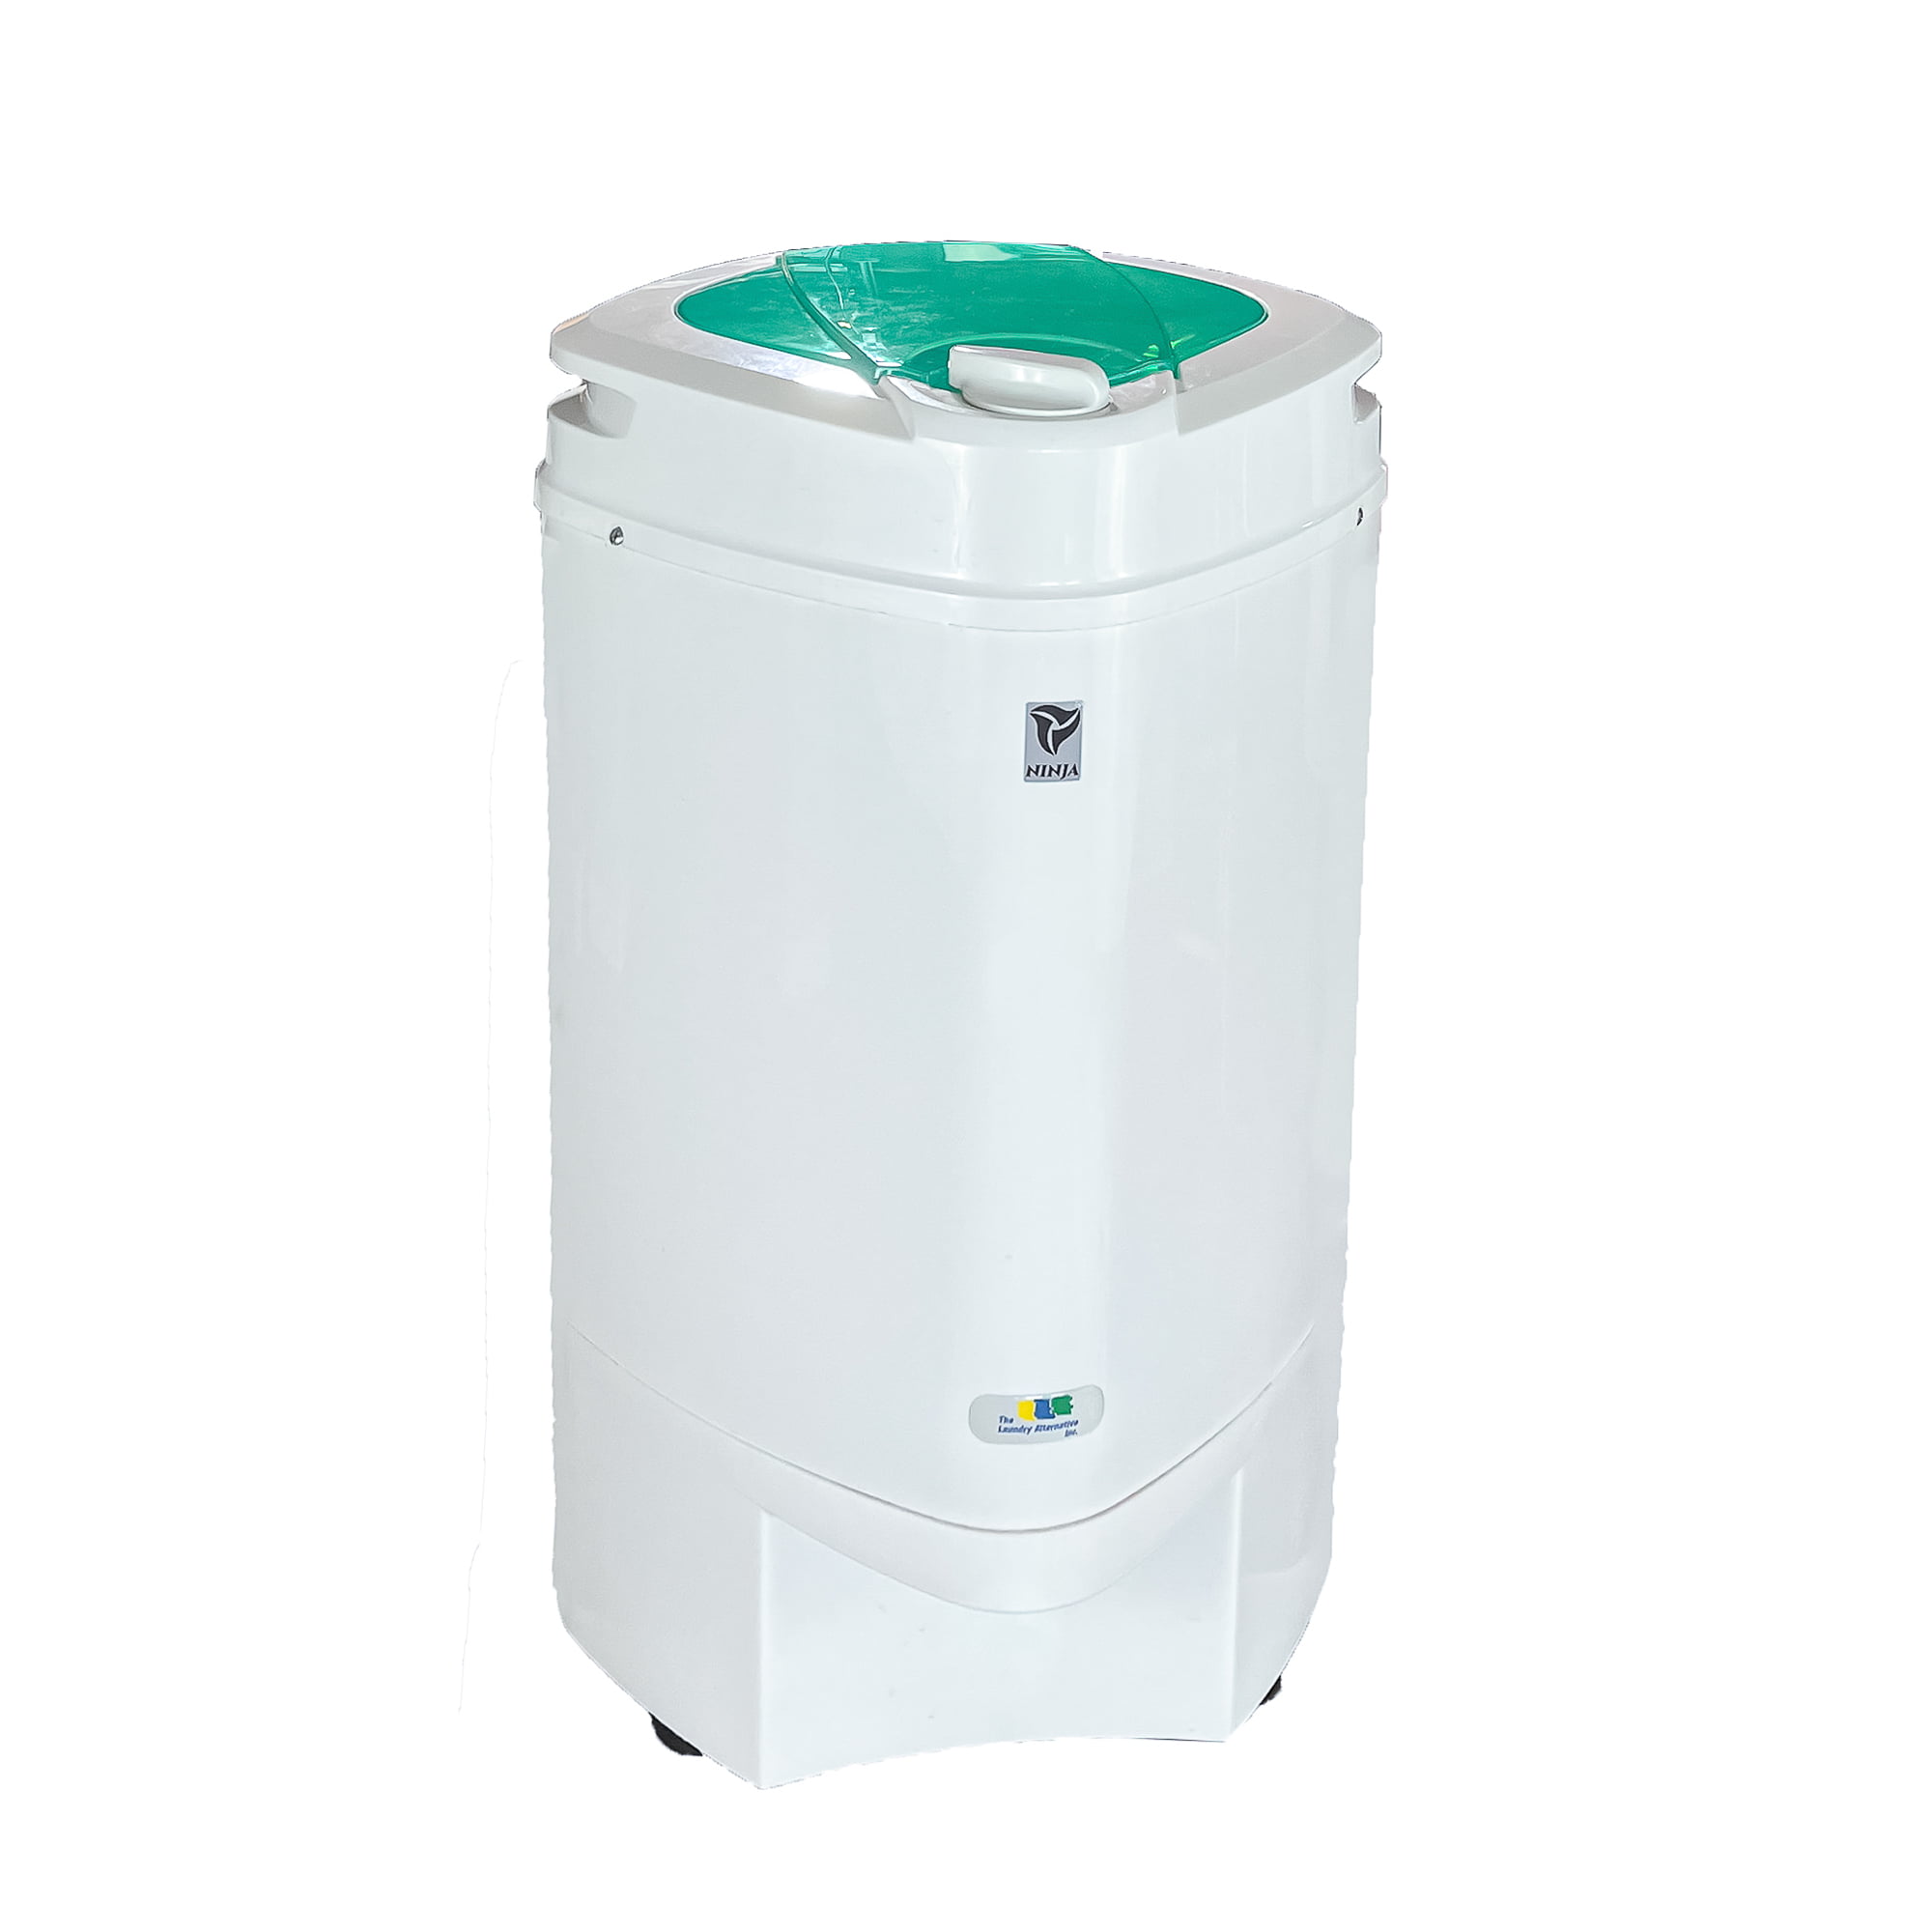 Hanil FD-08BL Portable Mini Compact Spin Dryer Clothes Laundary Food Waterer e_n 